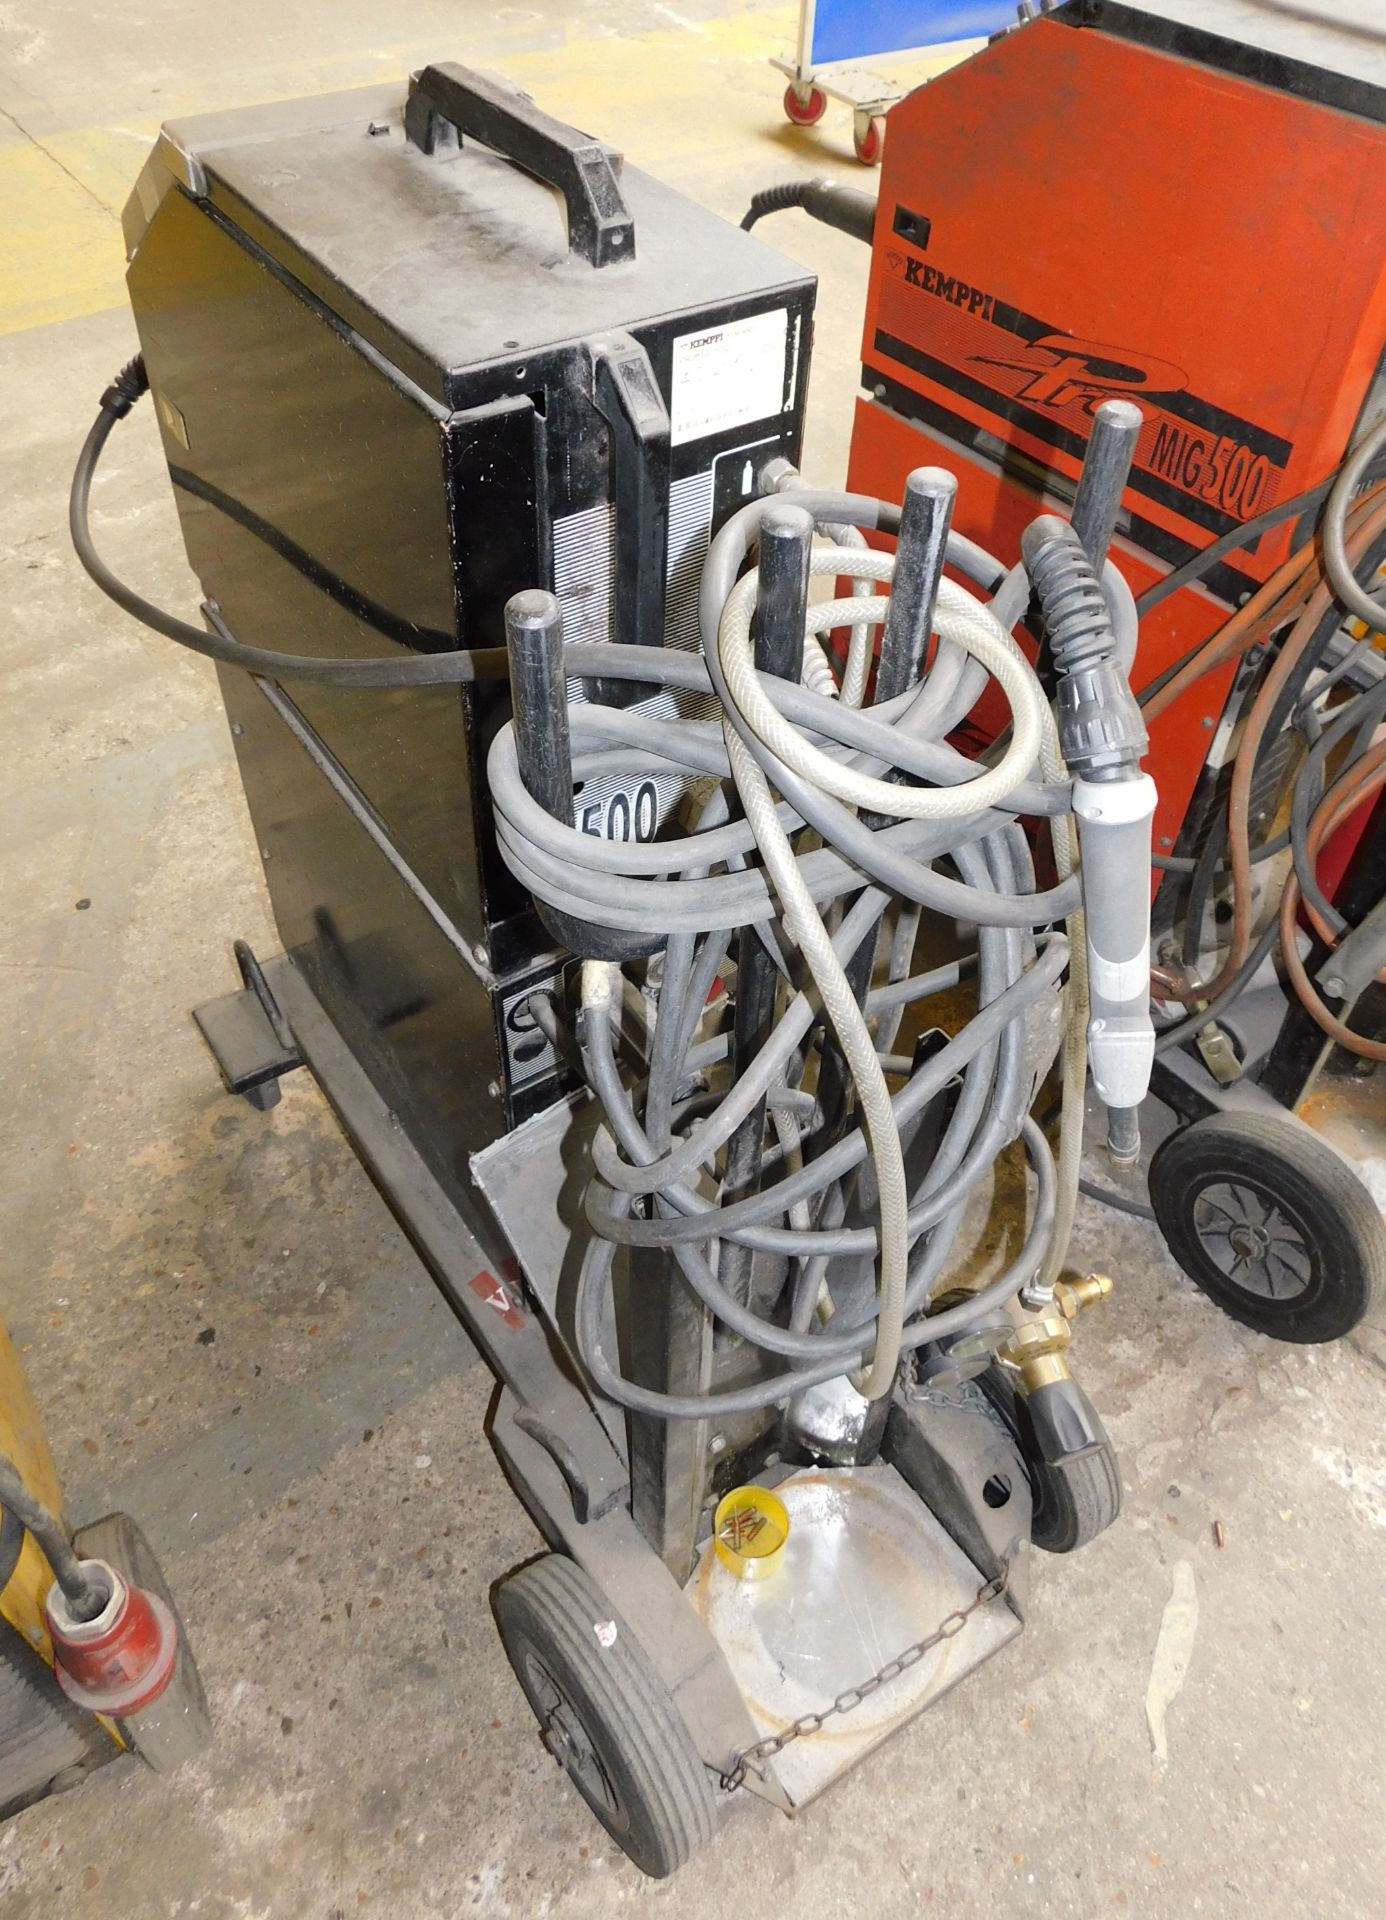 Kemppi MIG 3000 MIG Welder with Kemppi Promig MIG300 Wire Feed Unit, with Torch, Earth Lead & Gauge, - Image 4 of 5